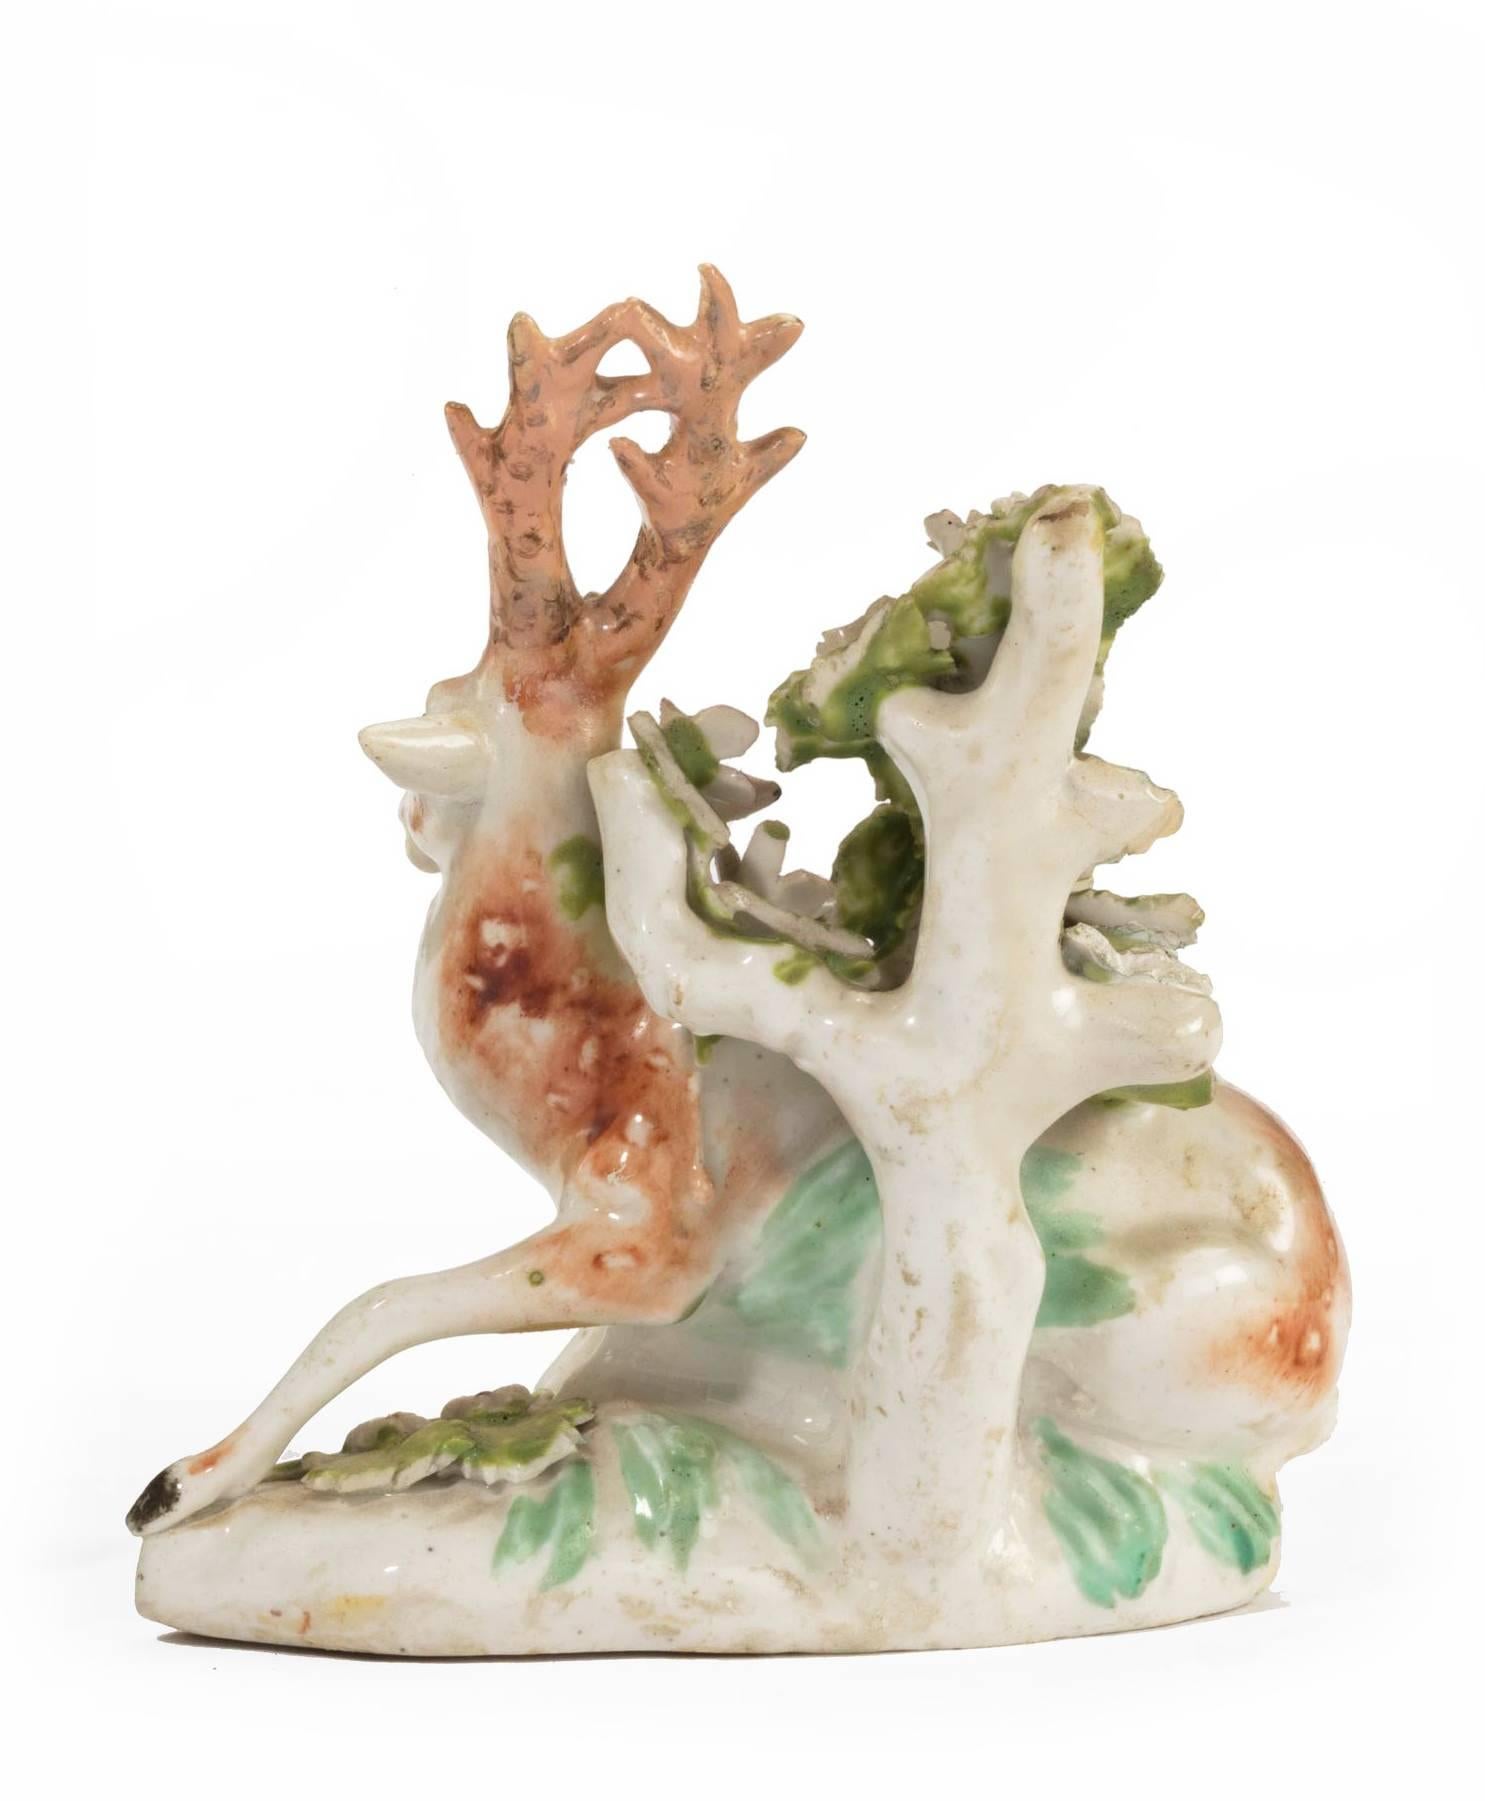 English Late 19th Century Staffordshire Pottery Model of a Recumbent Stag